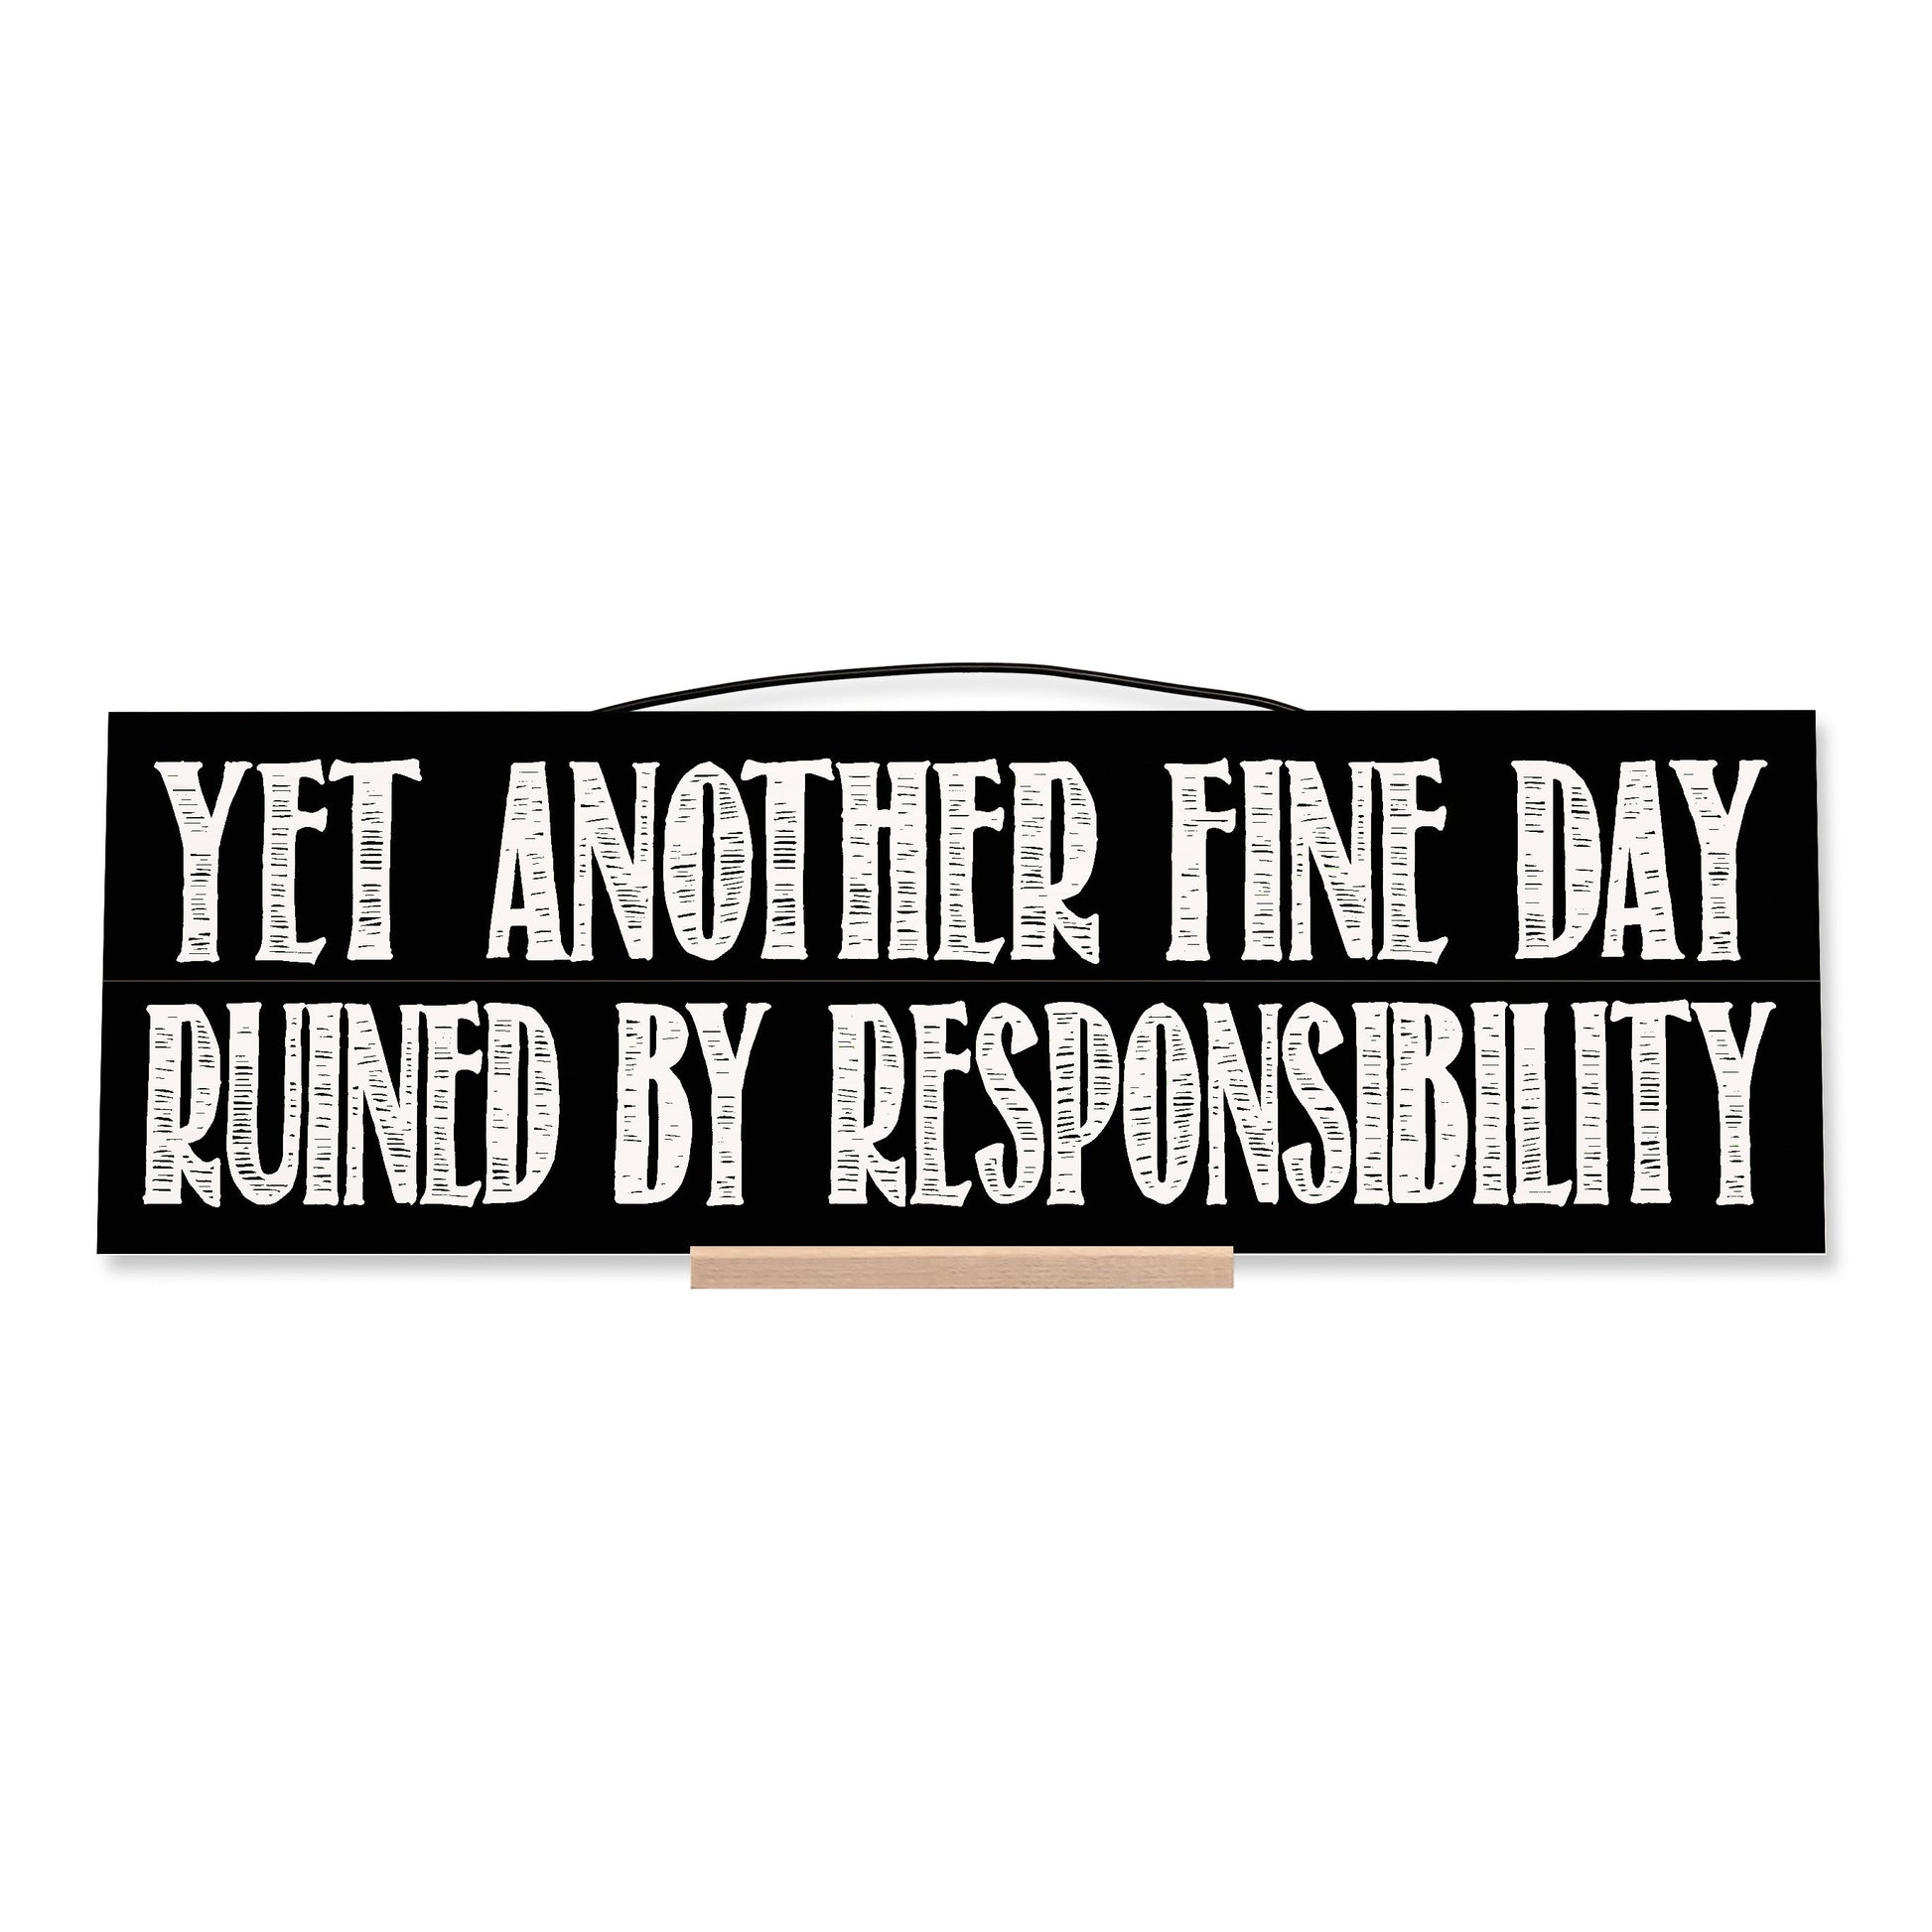 Ruined by Responsibility.